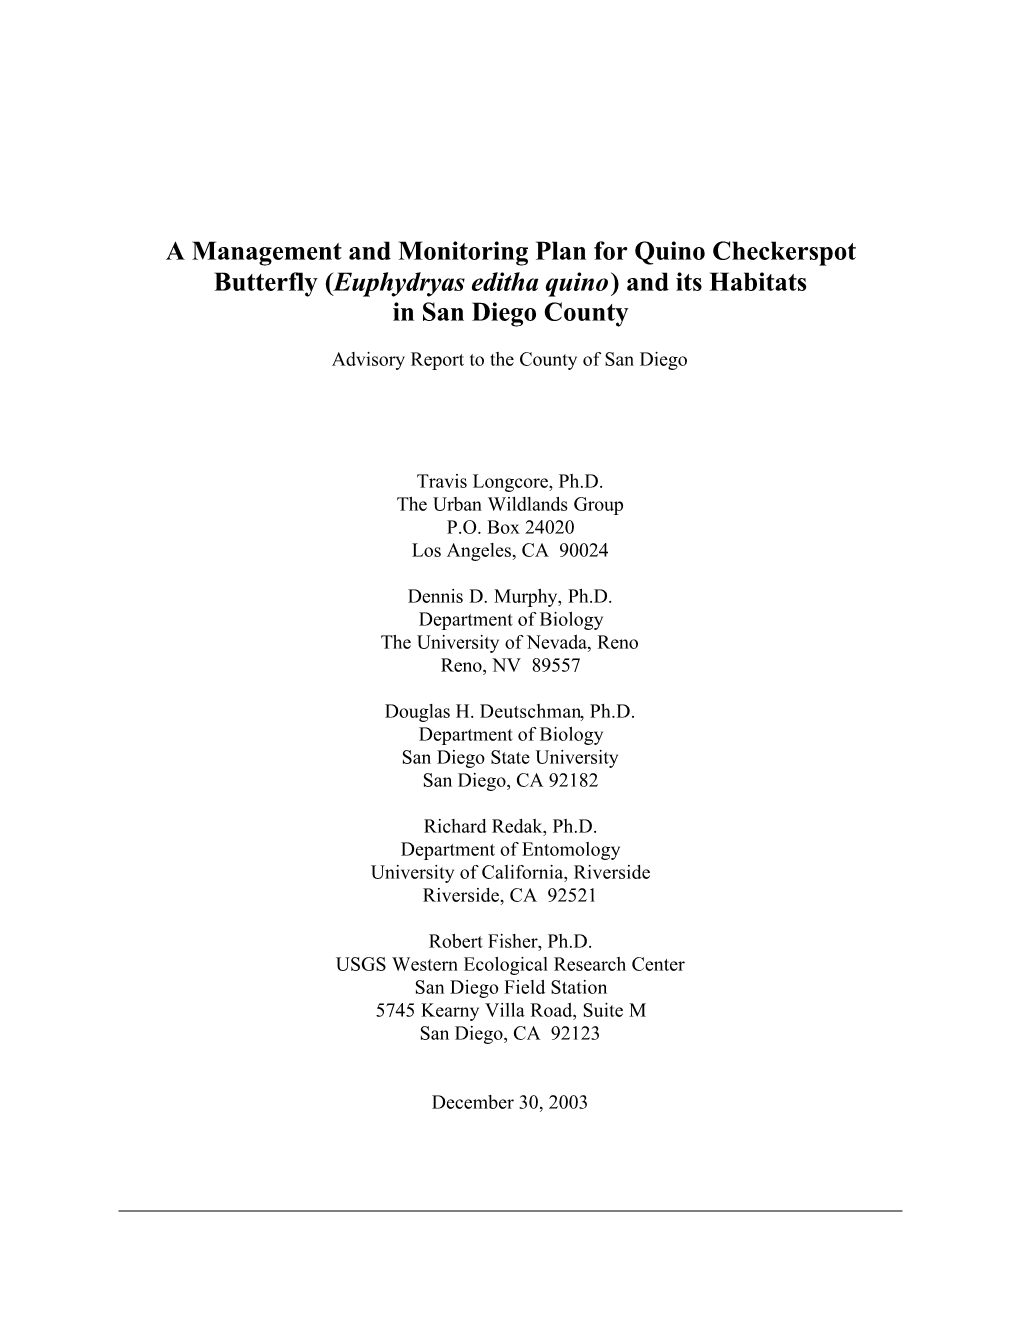 A Management and Monitoring Plan for Quino Checkerspot Butterfly (Euphydryas Editha Quino) and Its Habitats in San Diego County